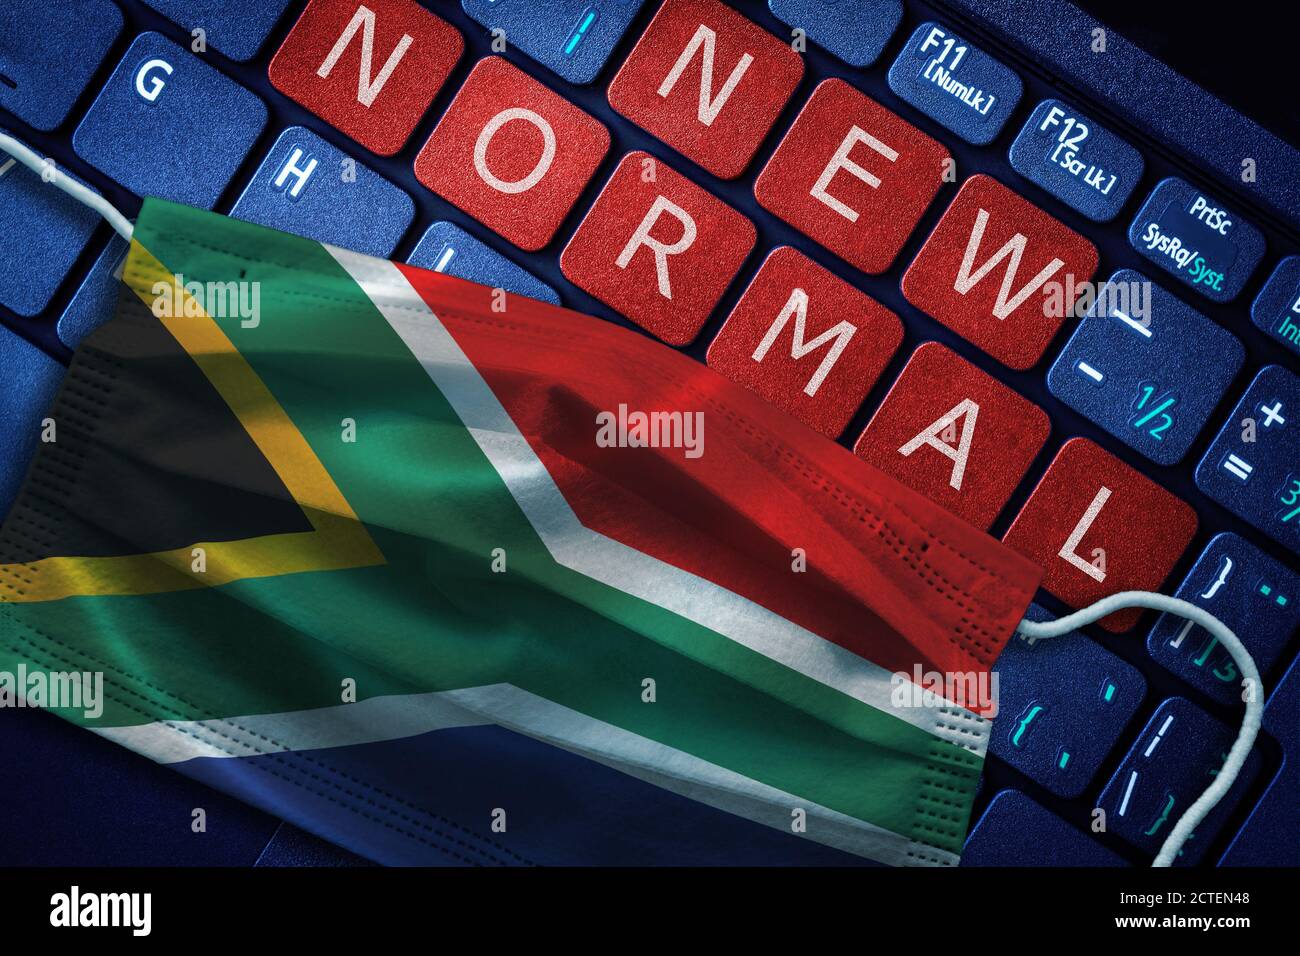 COVID-19 coronavirus new normal concept in South Africa as shown by South African flag on face mask with New Normal on laptop red alert keyboard butto Stock Photo